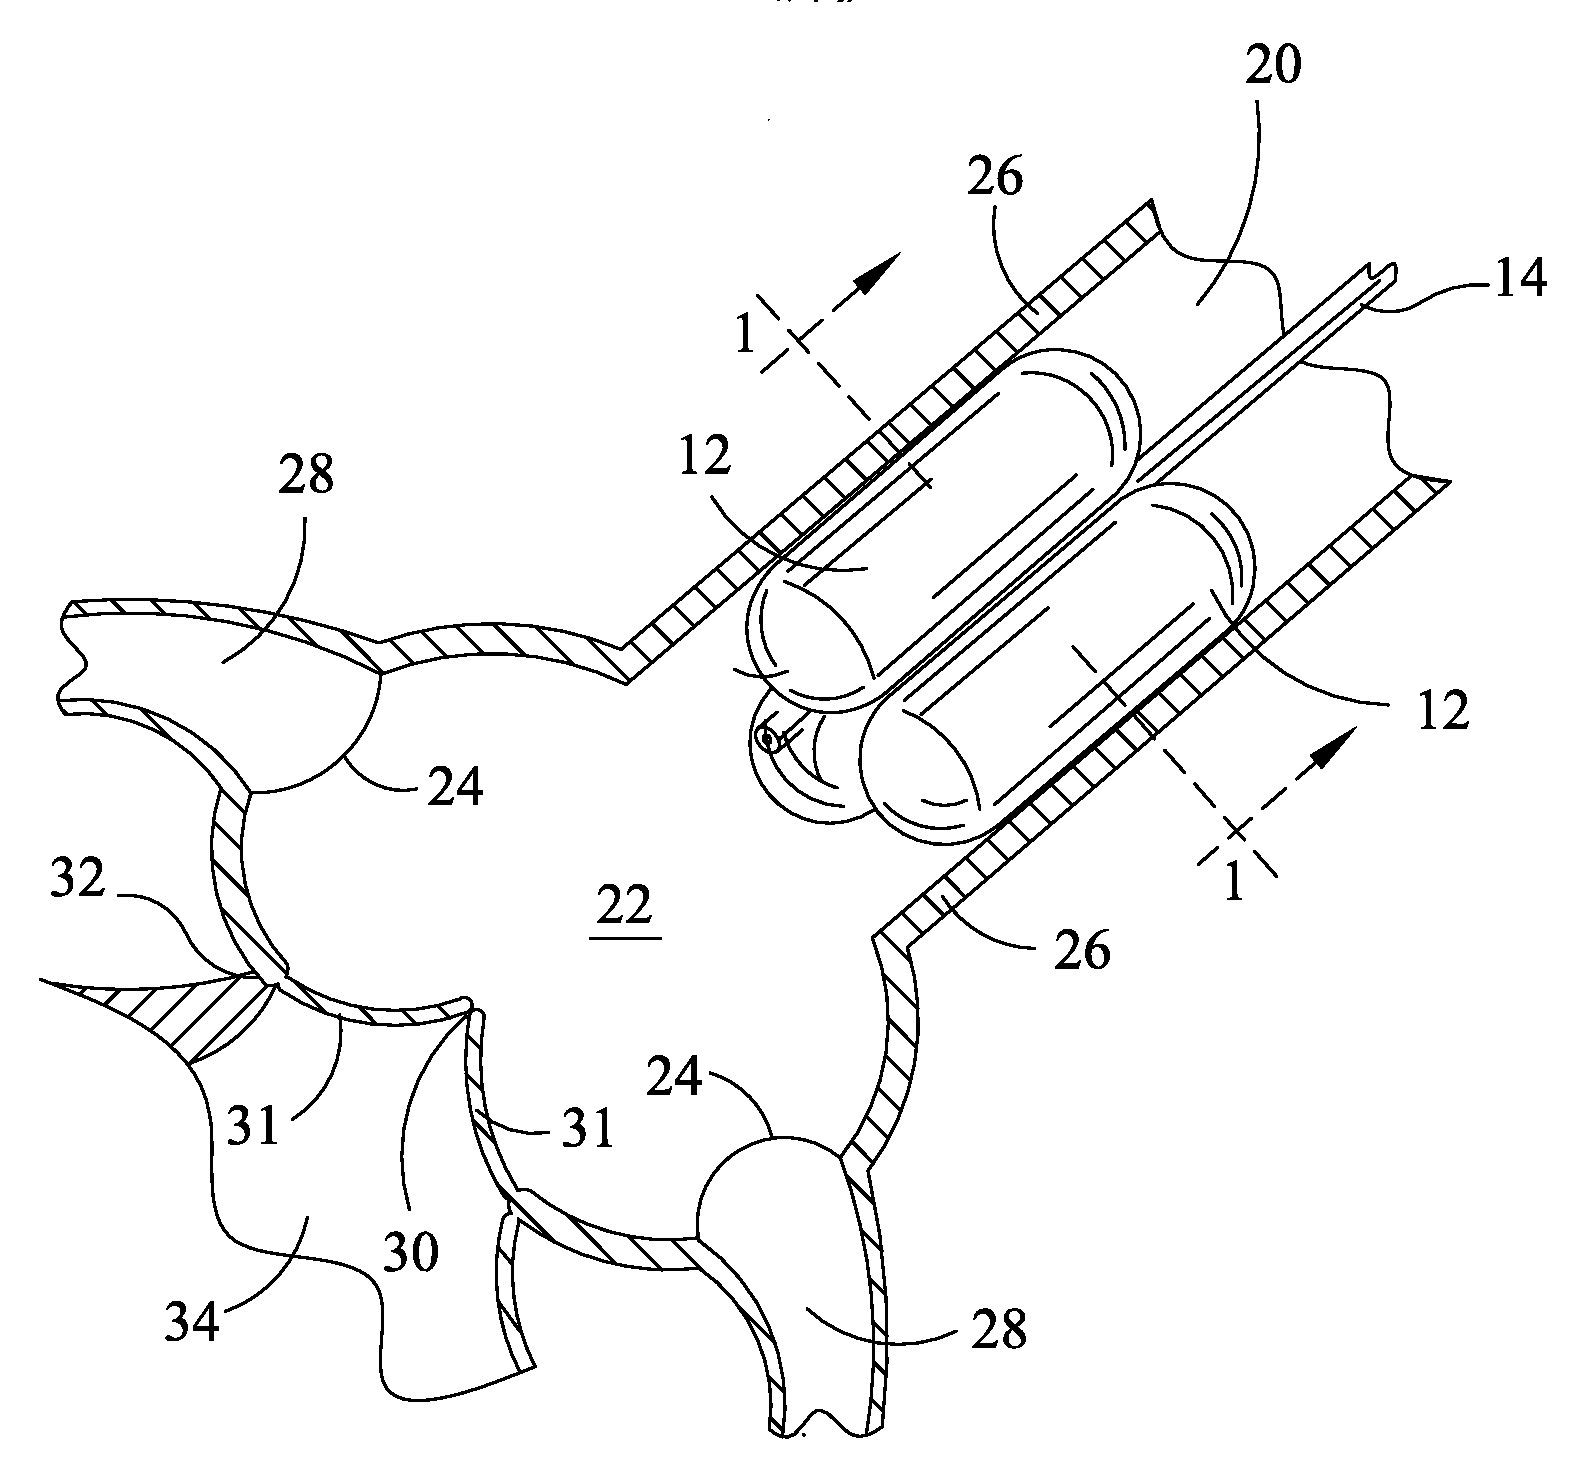 Method and apparatus for percutaneous aortic valve replacement